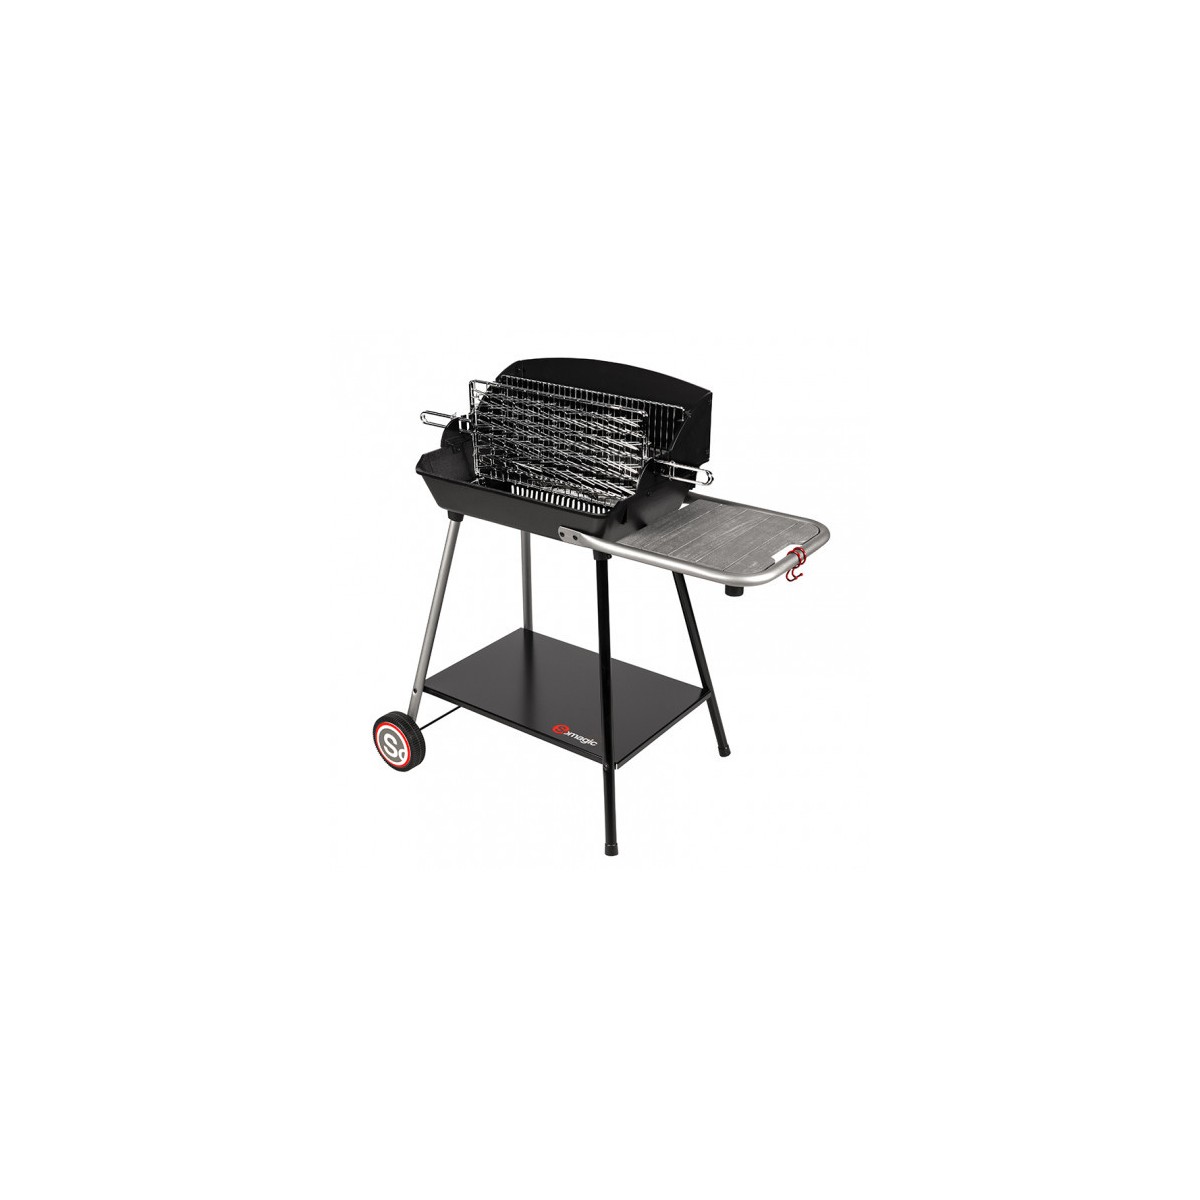 Exel Duo Grill - Barbecue Charbon Fonte Vertical